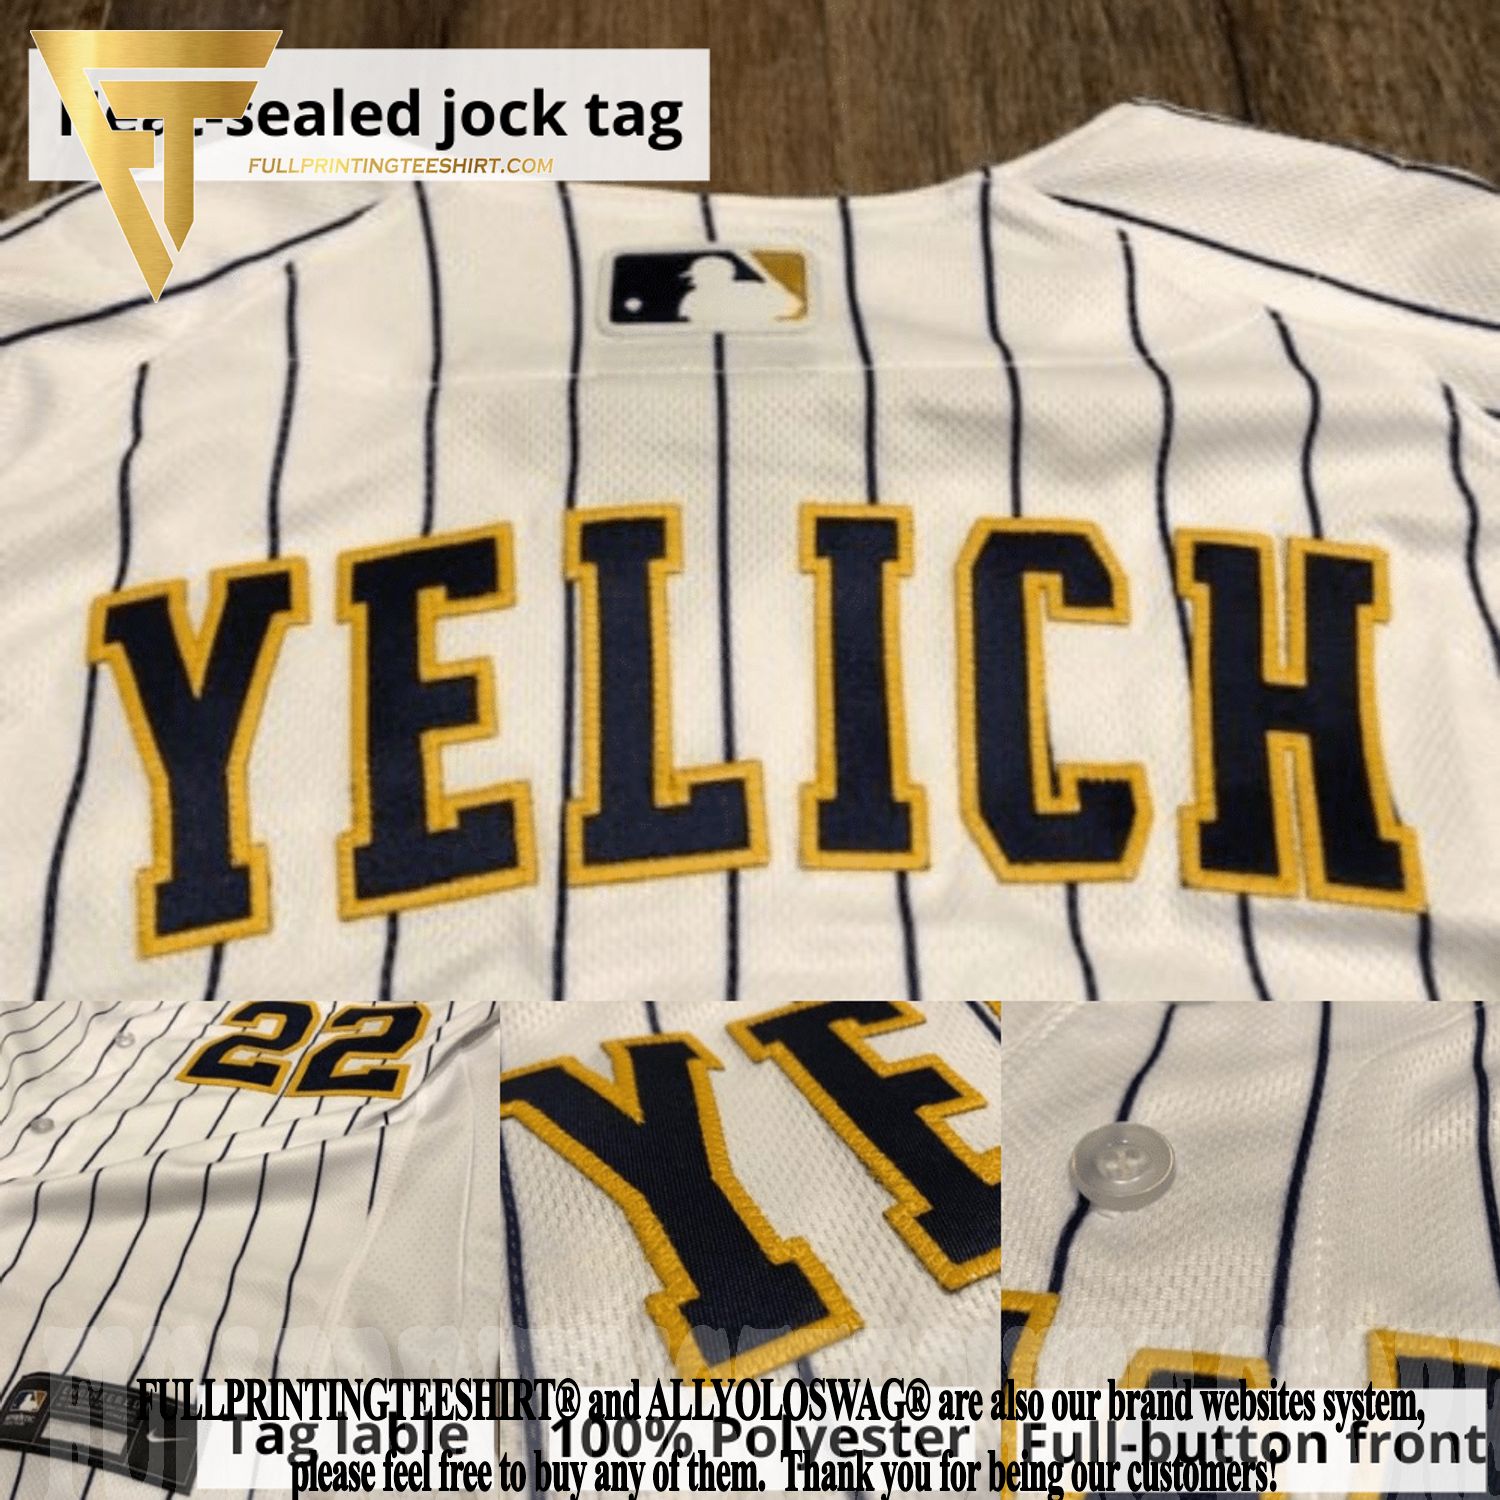 2022 mets all star jersey